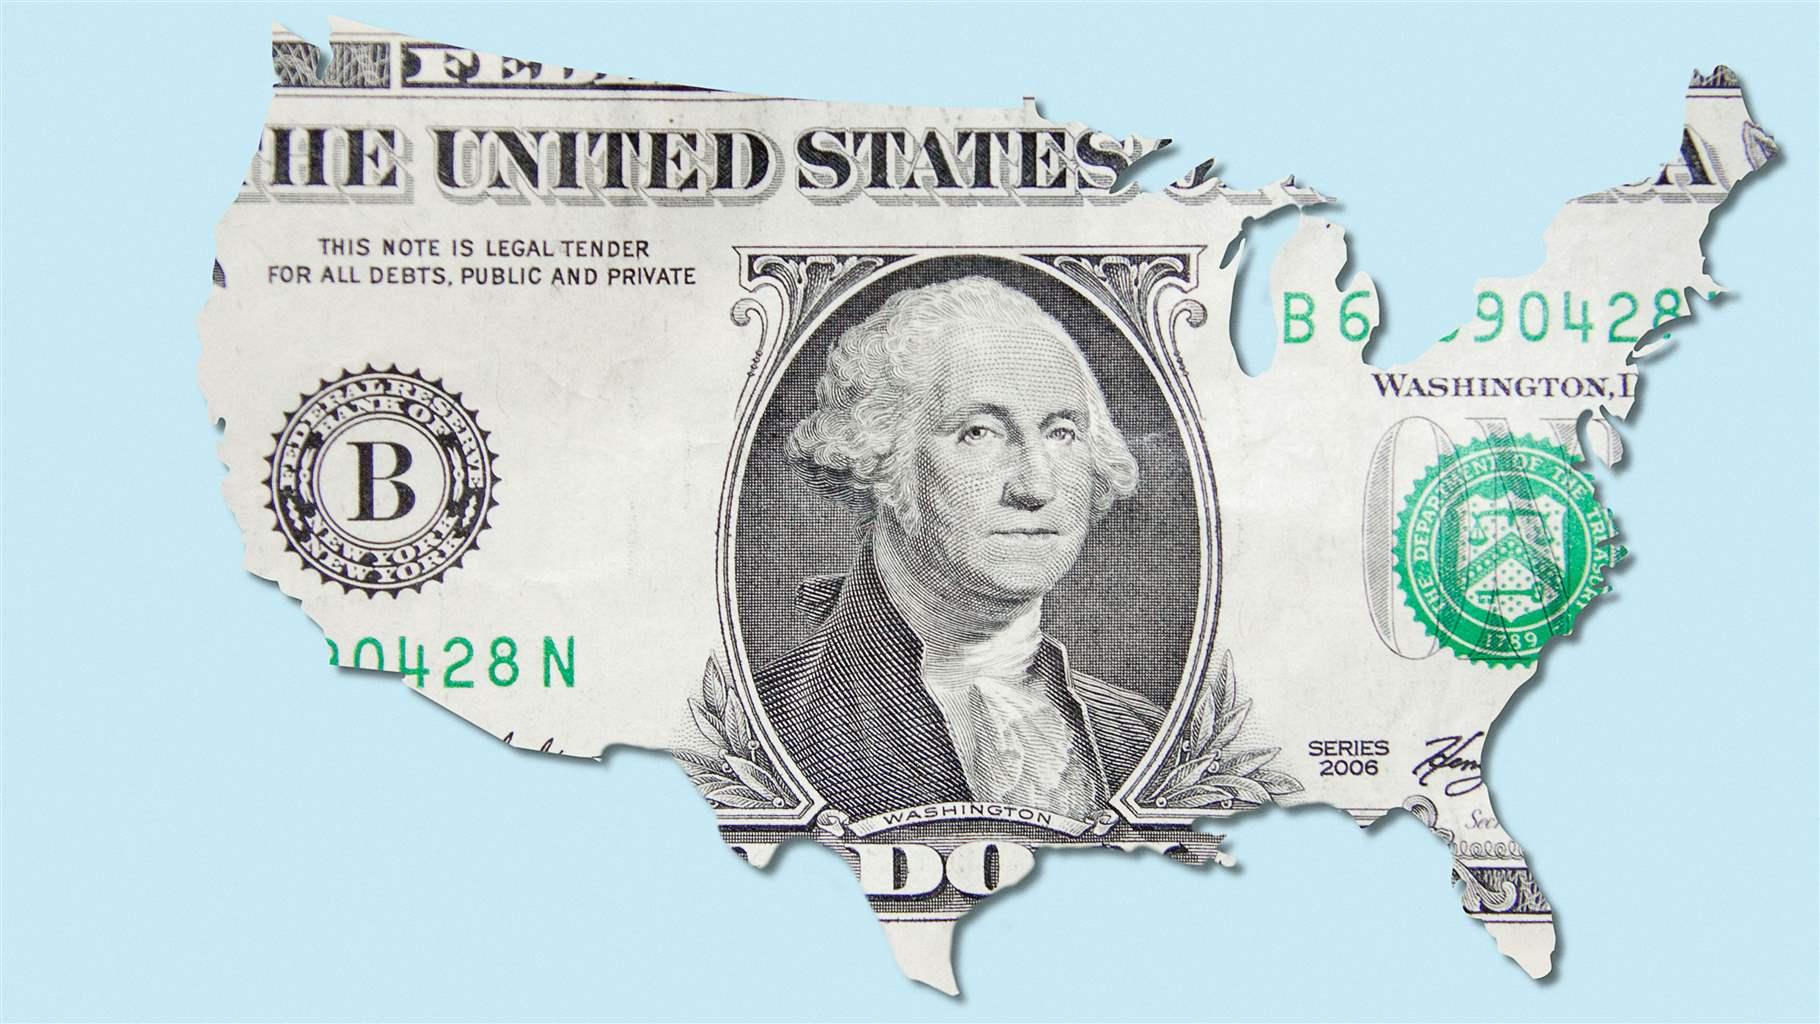 A map of the United States made out of a dollar bill